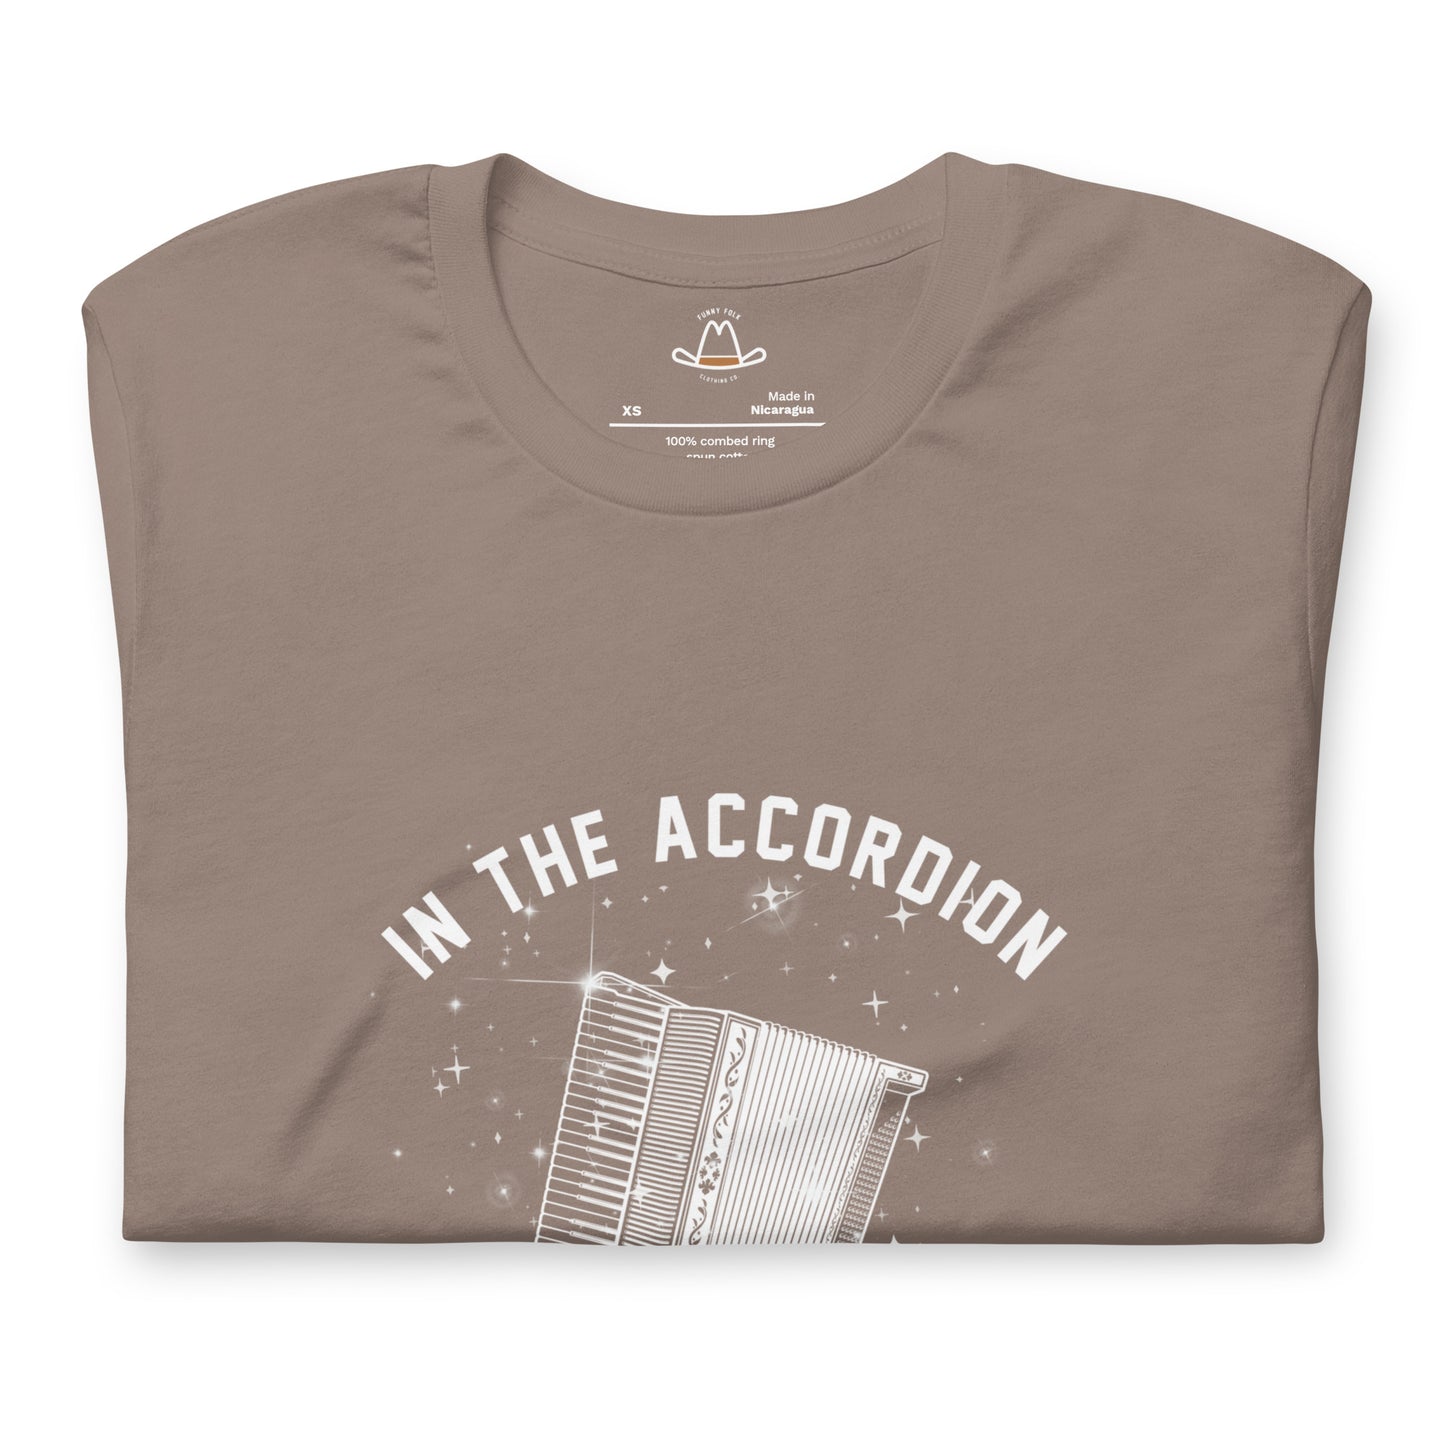 In The Accordion There is Trust Original Tee